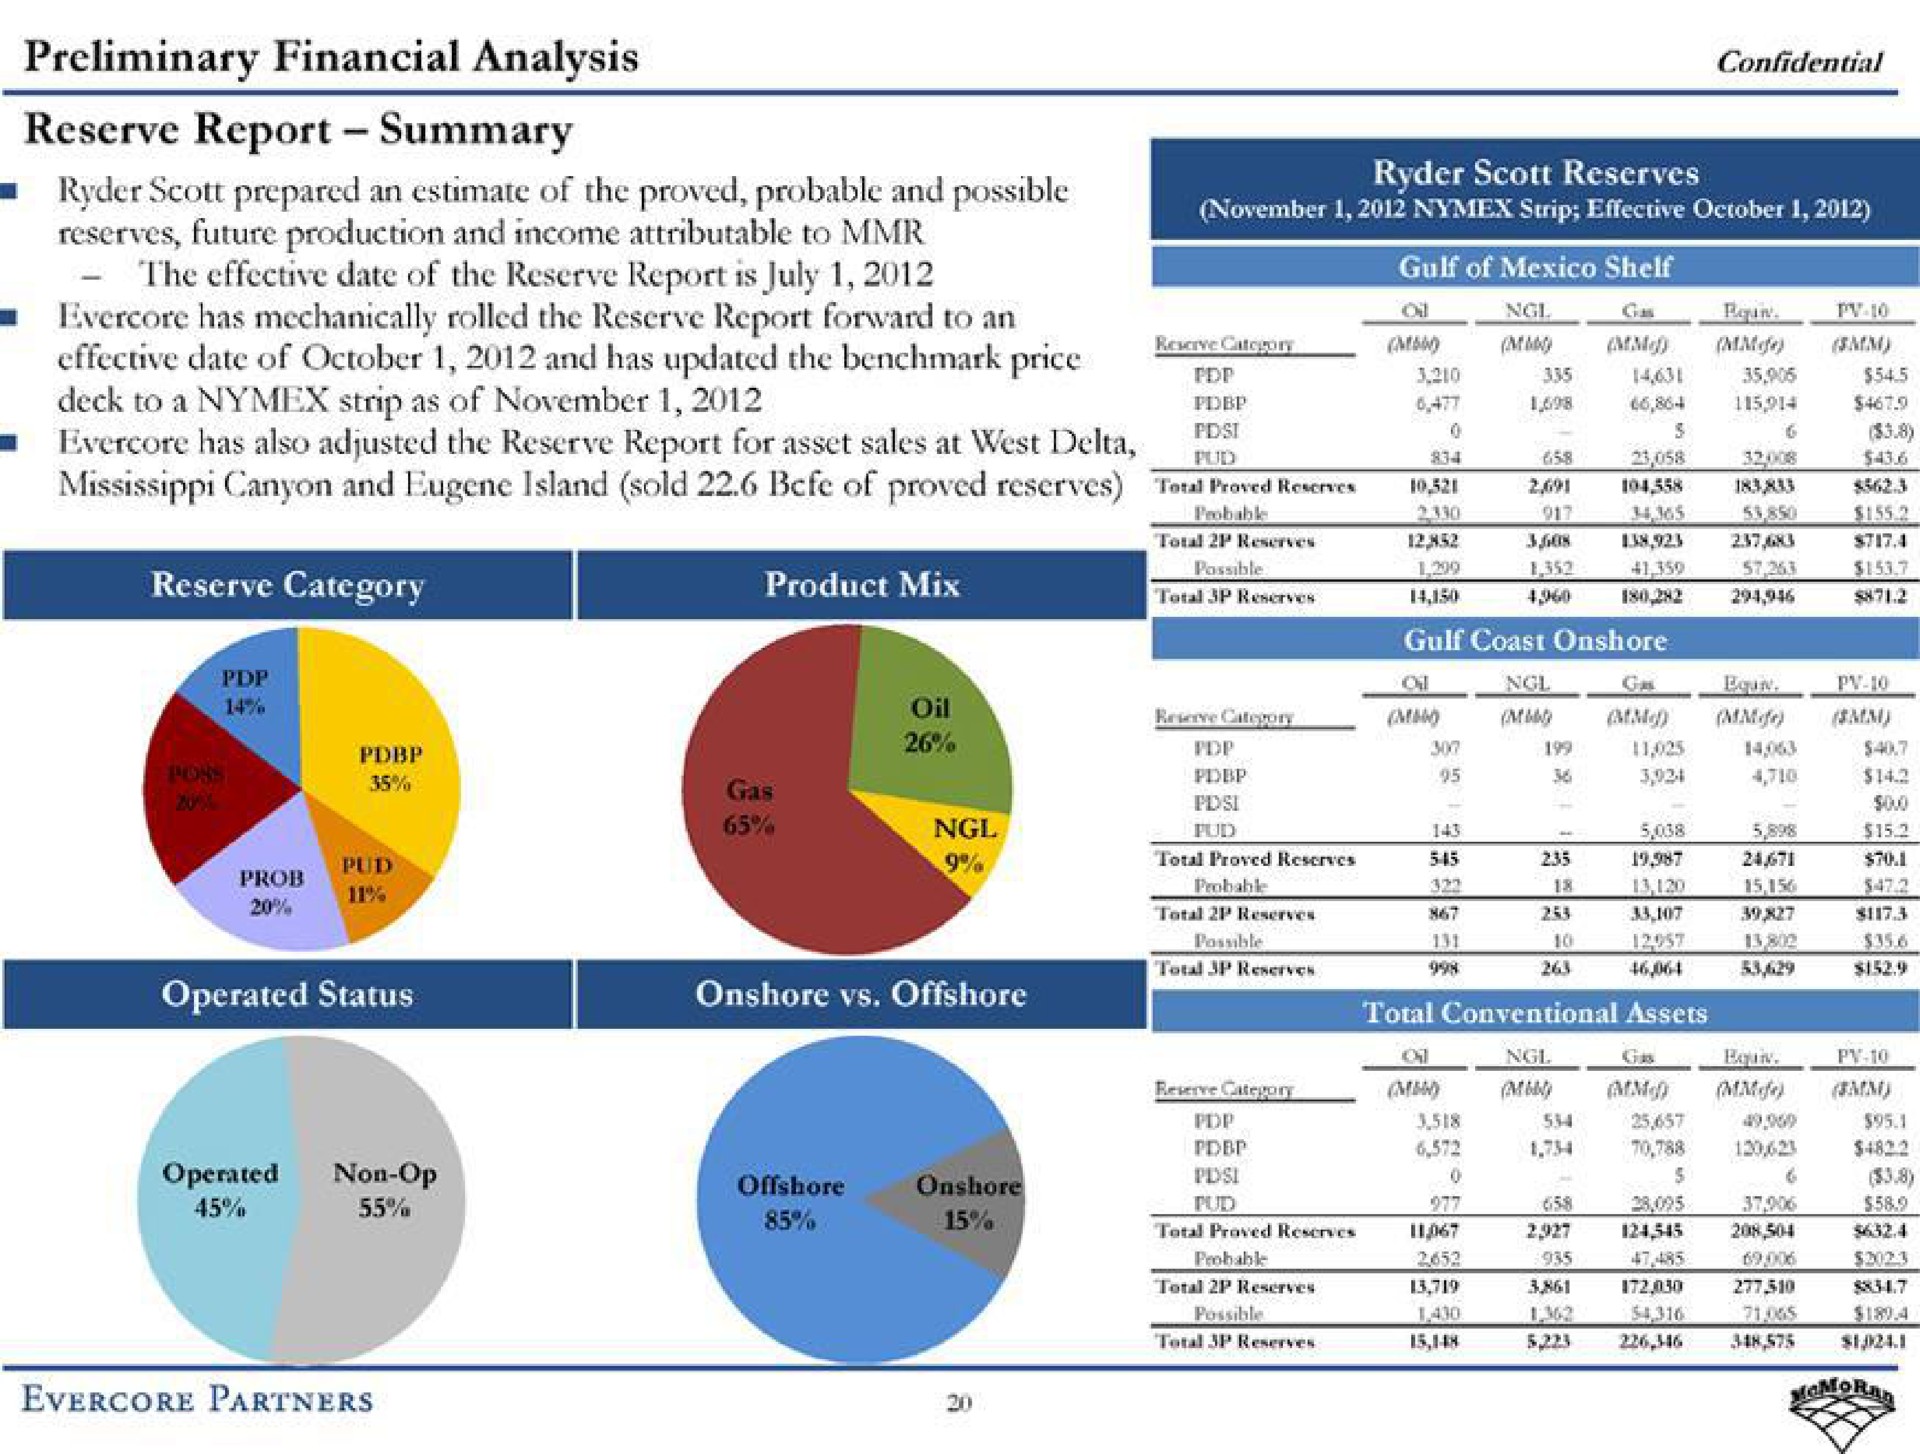 preliminary financial analysis reserve report summary a ryder prepared an estimate of the proved probable and possible has mechanically rolled the reserve report forward to an has also adjusted the reserve report for asset sales at west delta canyon and island sold of proved reserves confidential a i bod tort proved reserves | Evercore